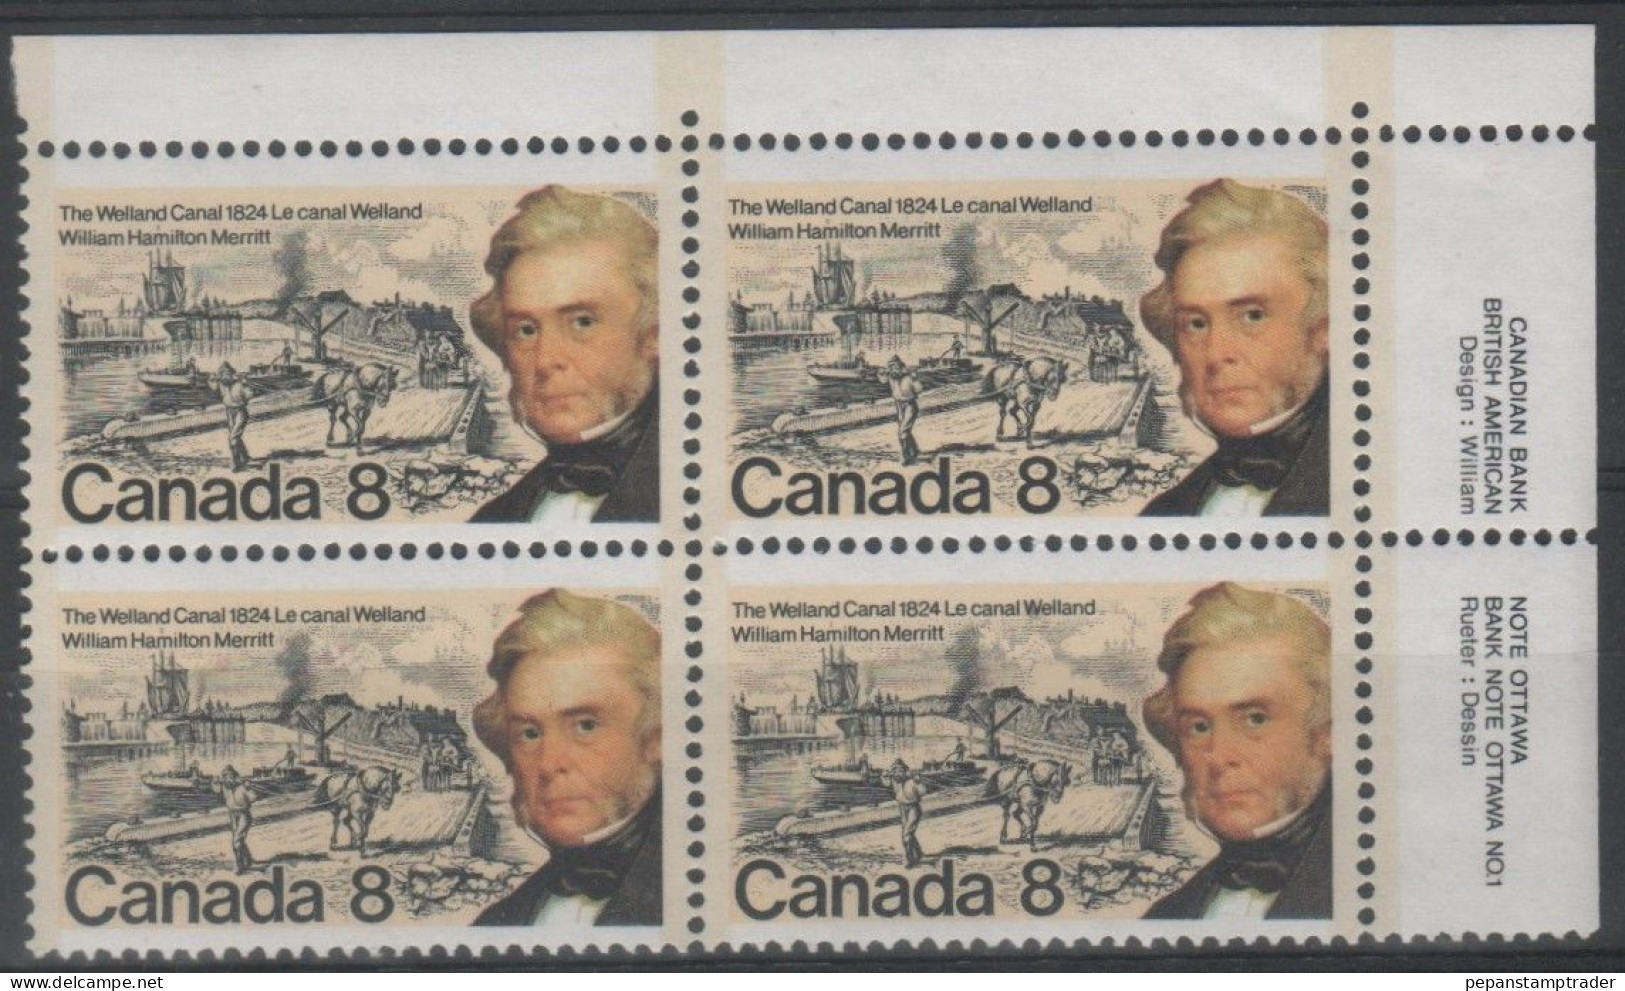 Canada - #655 - MNH PB - Num. Planches & Inscriptions Marge